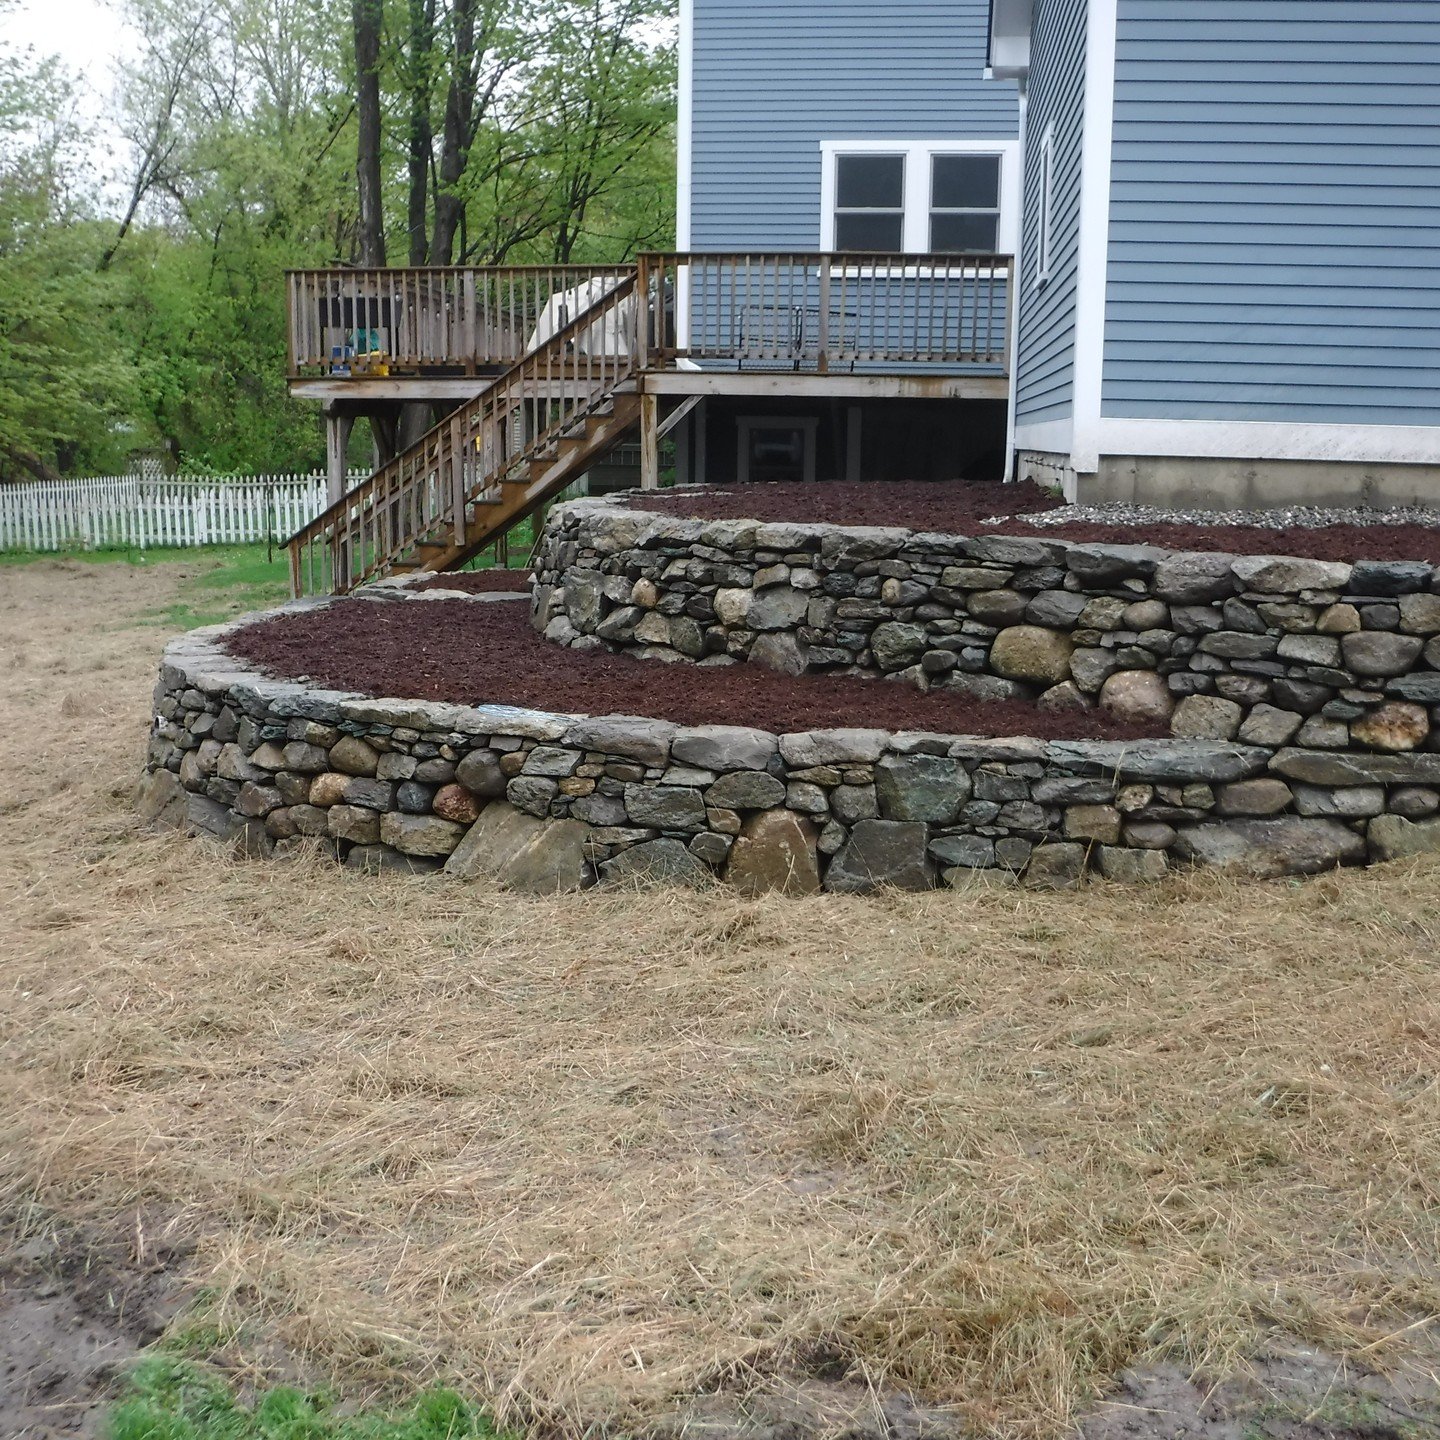 Another one in the books!

A fun little story for this stone. This house was built maybe 5 years ago, tearing down a much older house. That older house sat on a dry stone foundation, and the client opted to save all the stone. When we showed up it wa